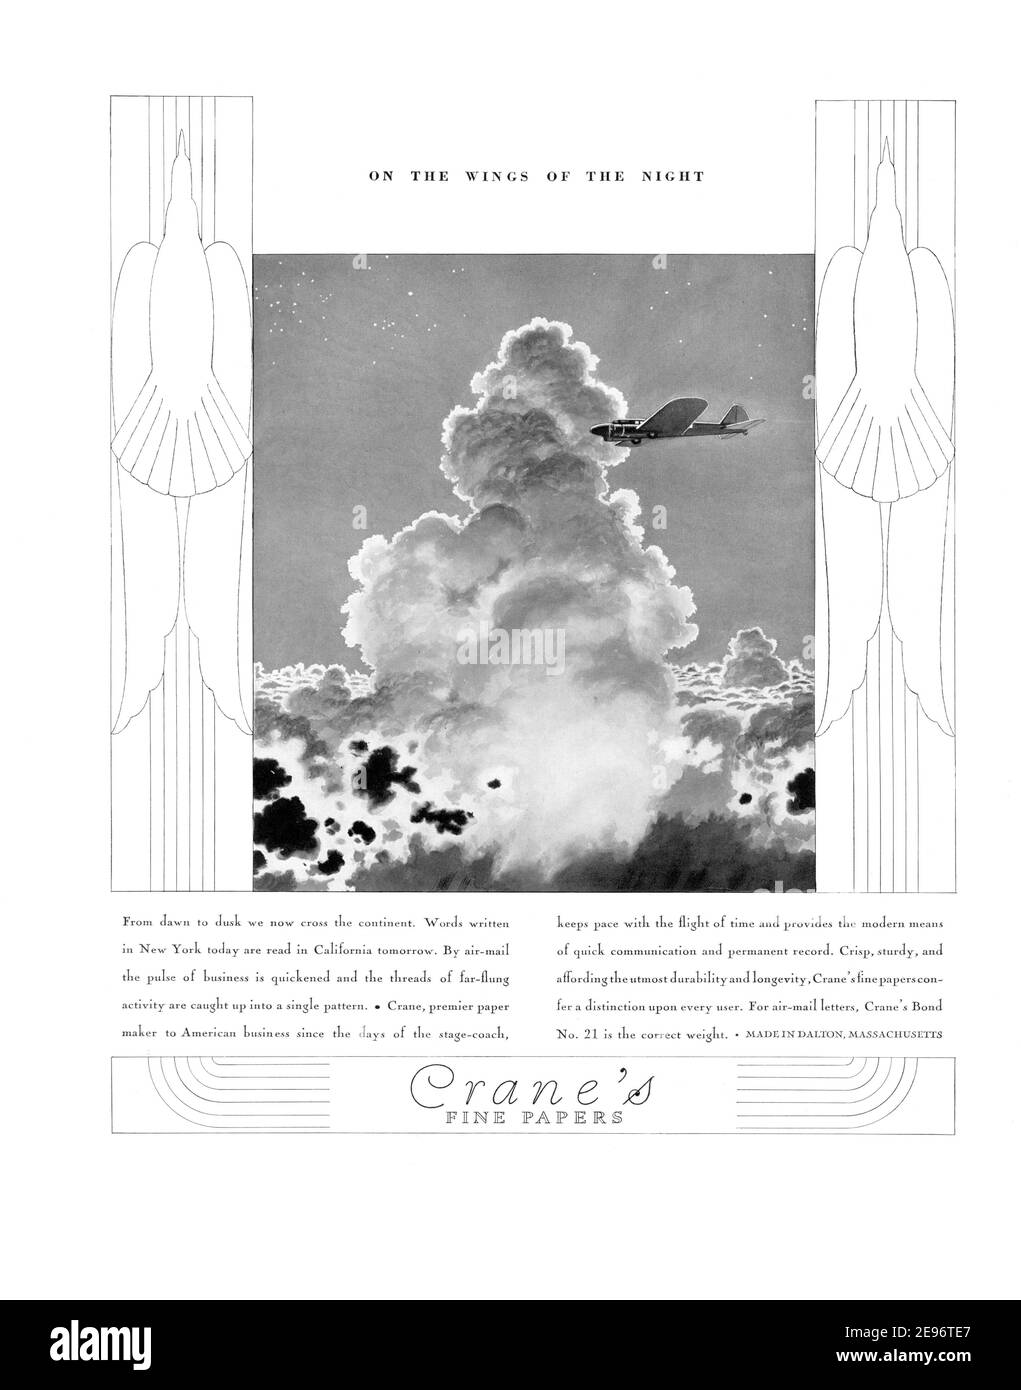 1935 Crane's Fine Paper 'On the Wings of the Flight' Advertisement, retouched and revived, A3+, 600dpi Stock Photo